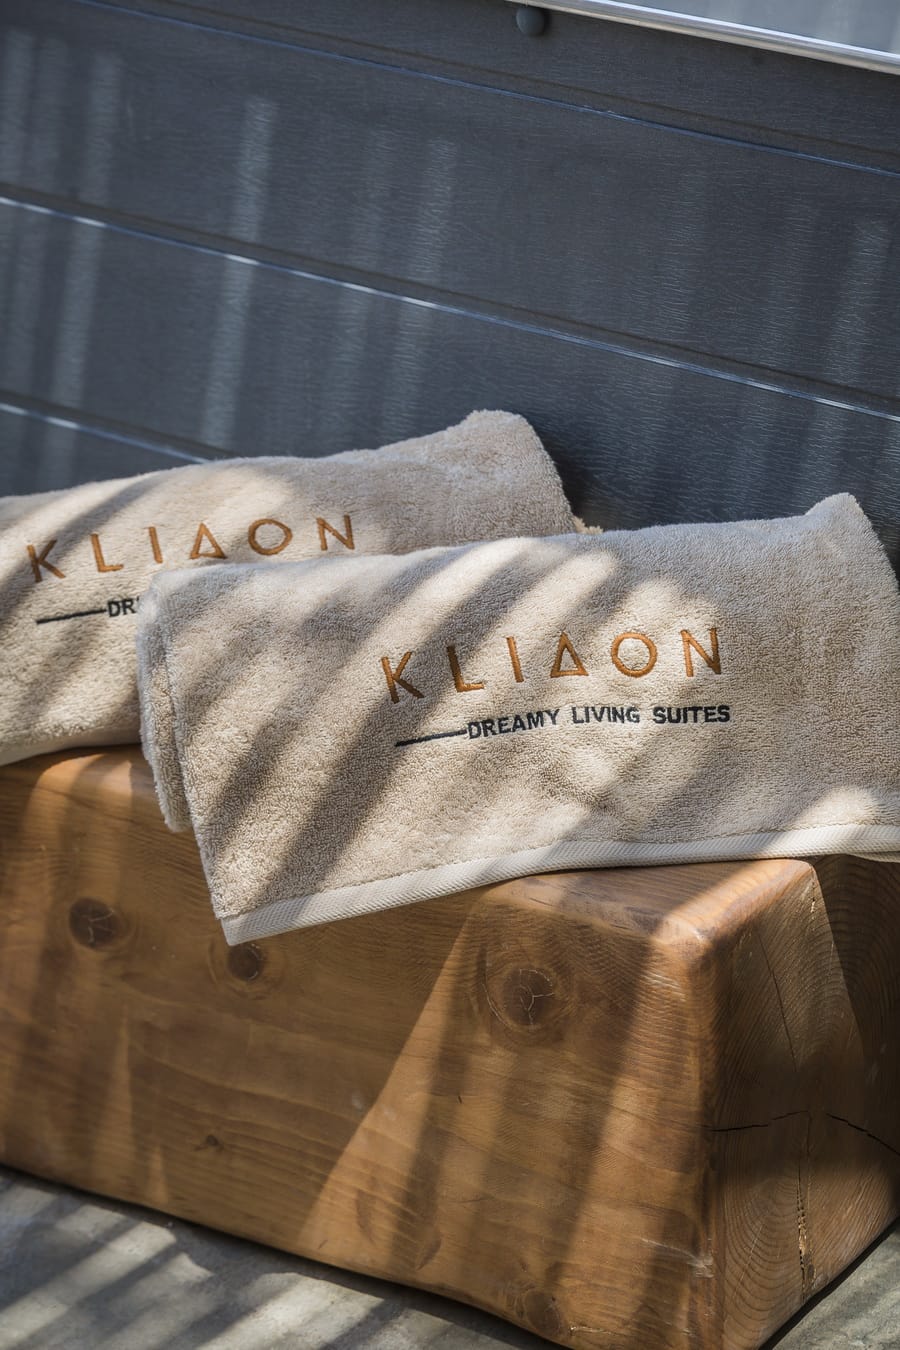 Klidon Dreamy Living Suites by Stamenis Nikiforos Photography